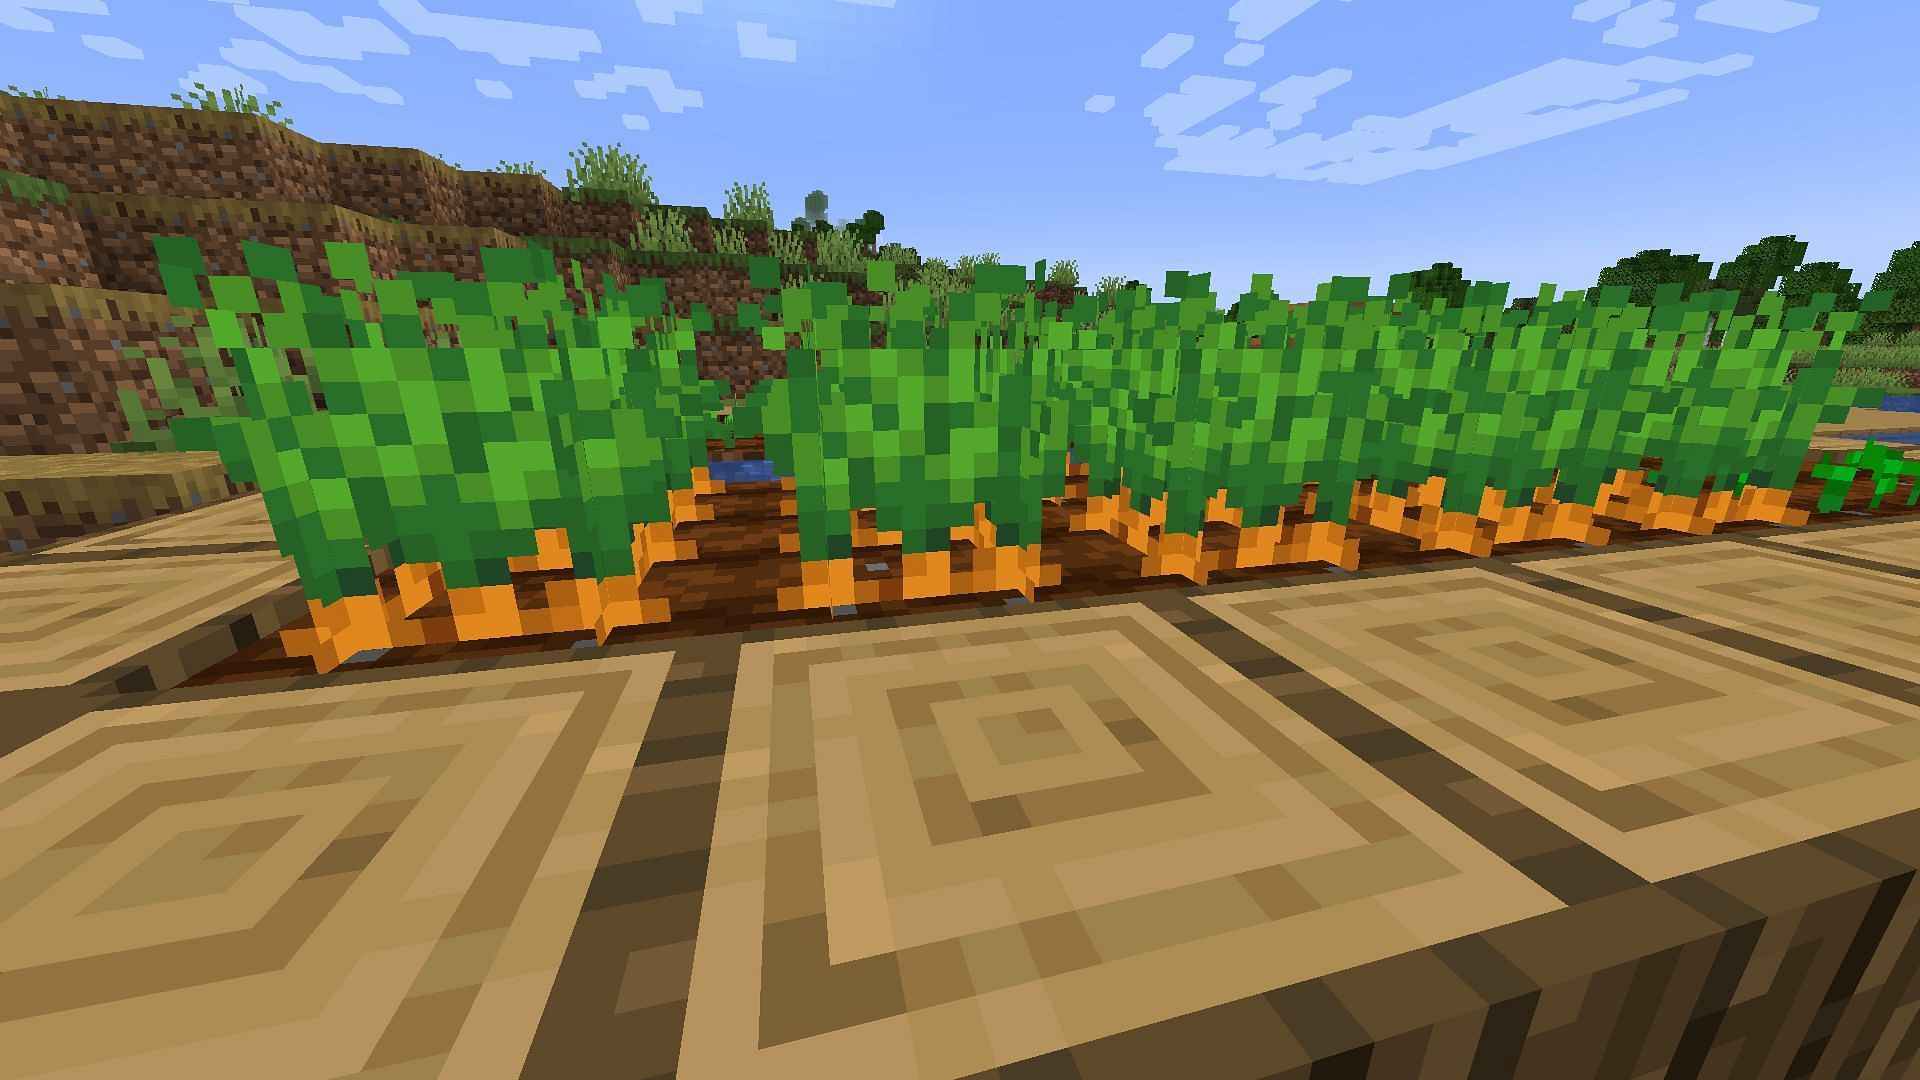 Carrots can be sown normally (Image via Minecraft 1.19 update)